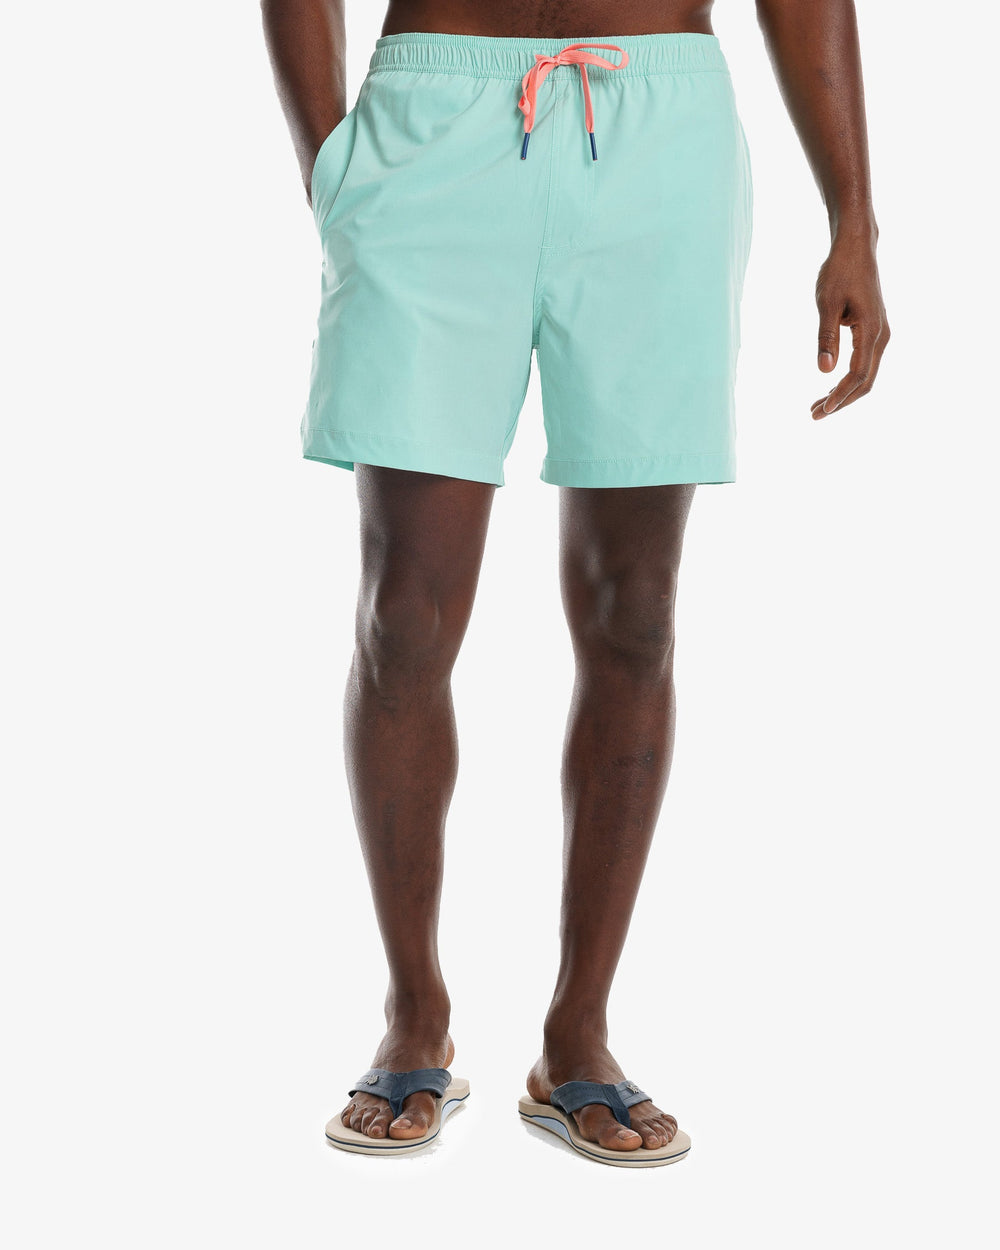 The model front view of the Men's Solid Swim Trunk by Southern Tide - Isle of Pines